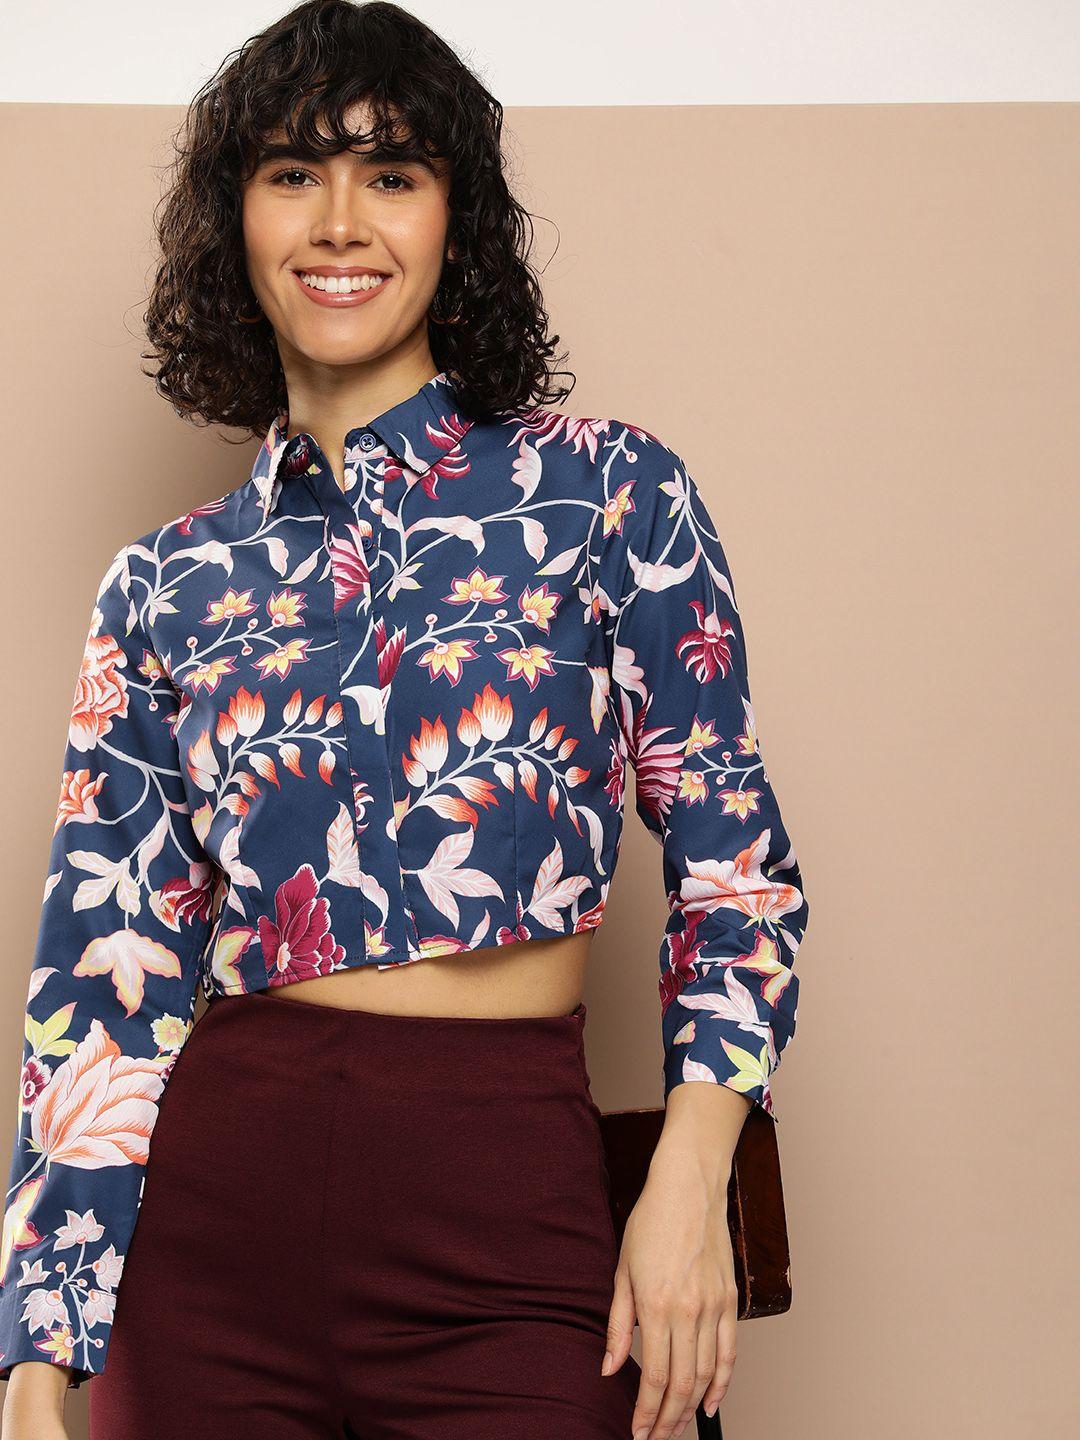 encore by invictus floral printed casual crop shirt